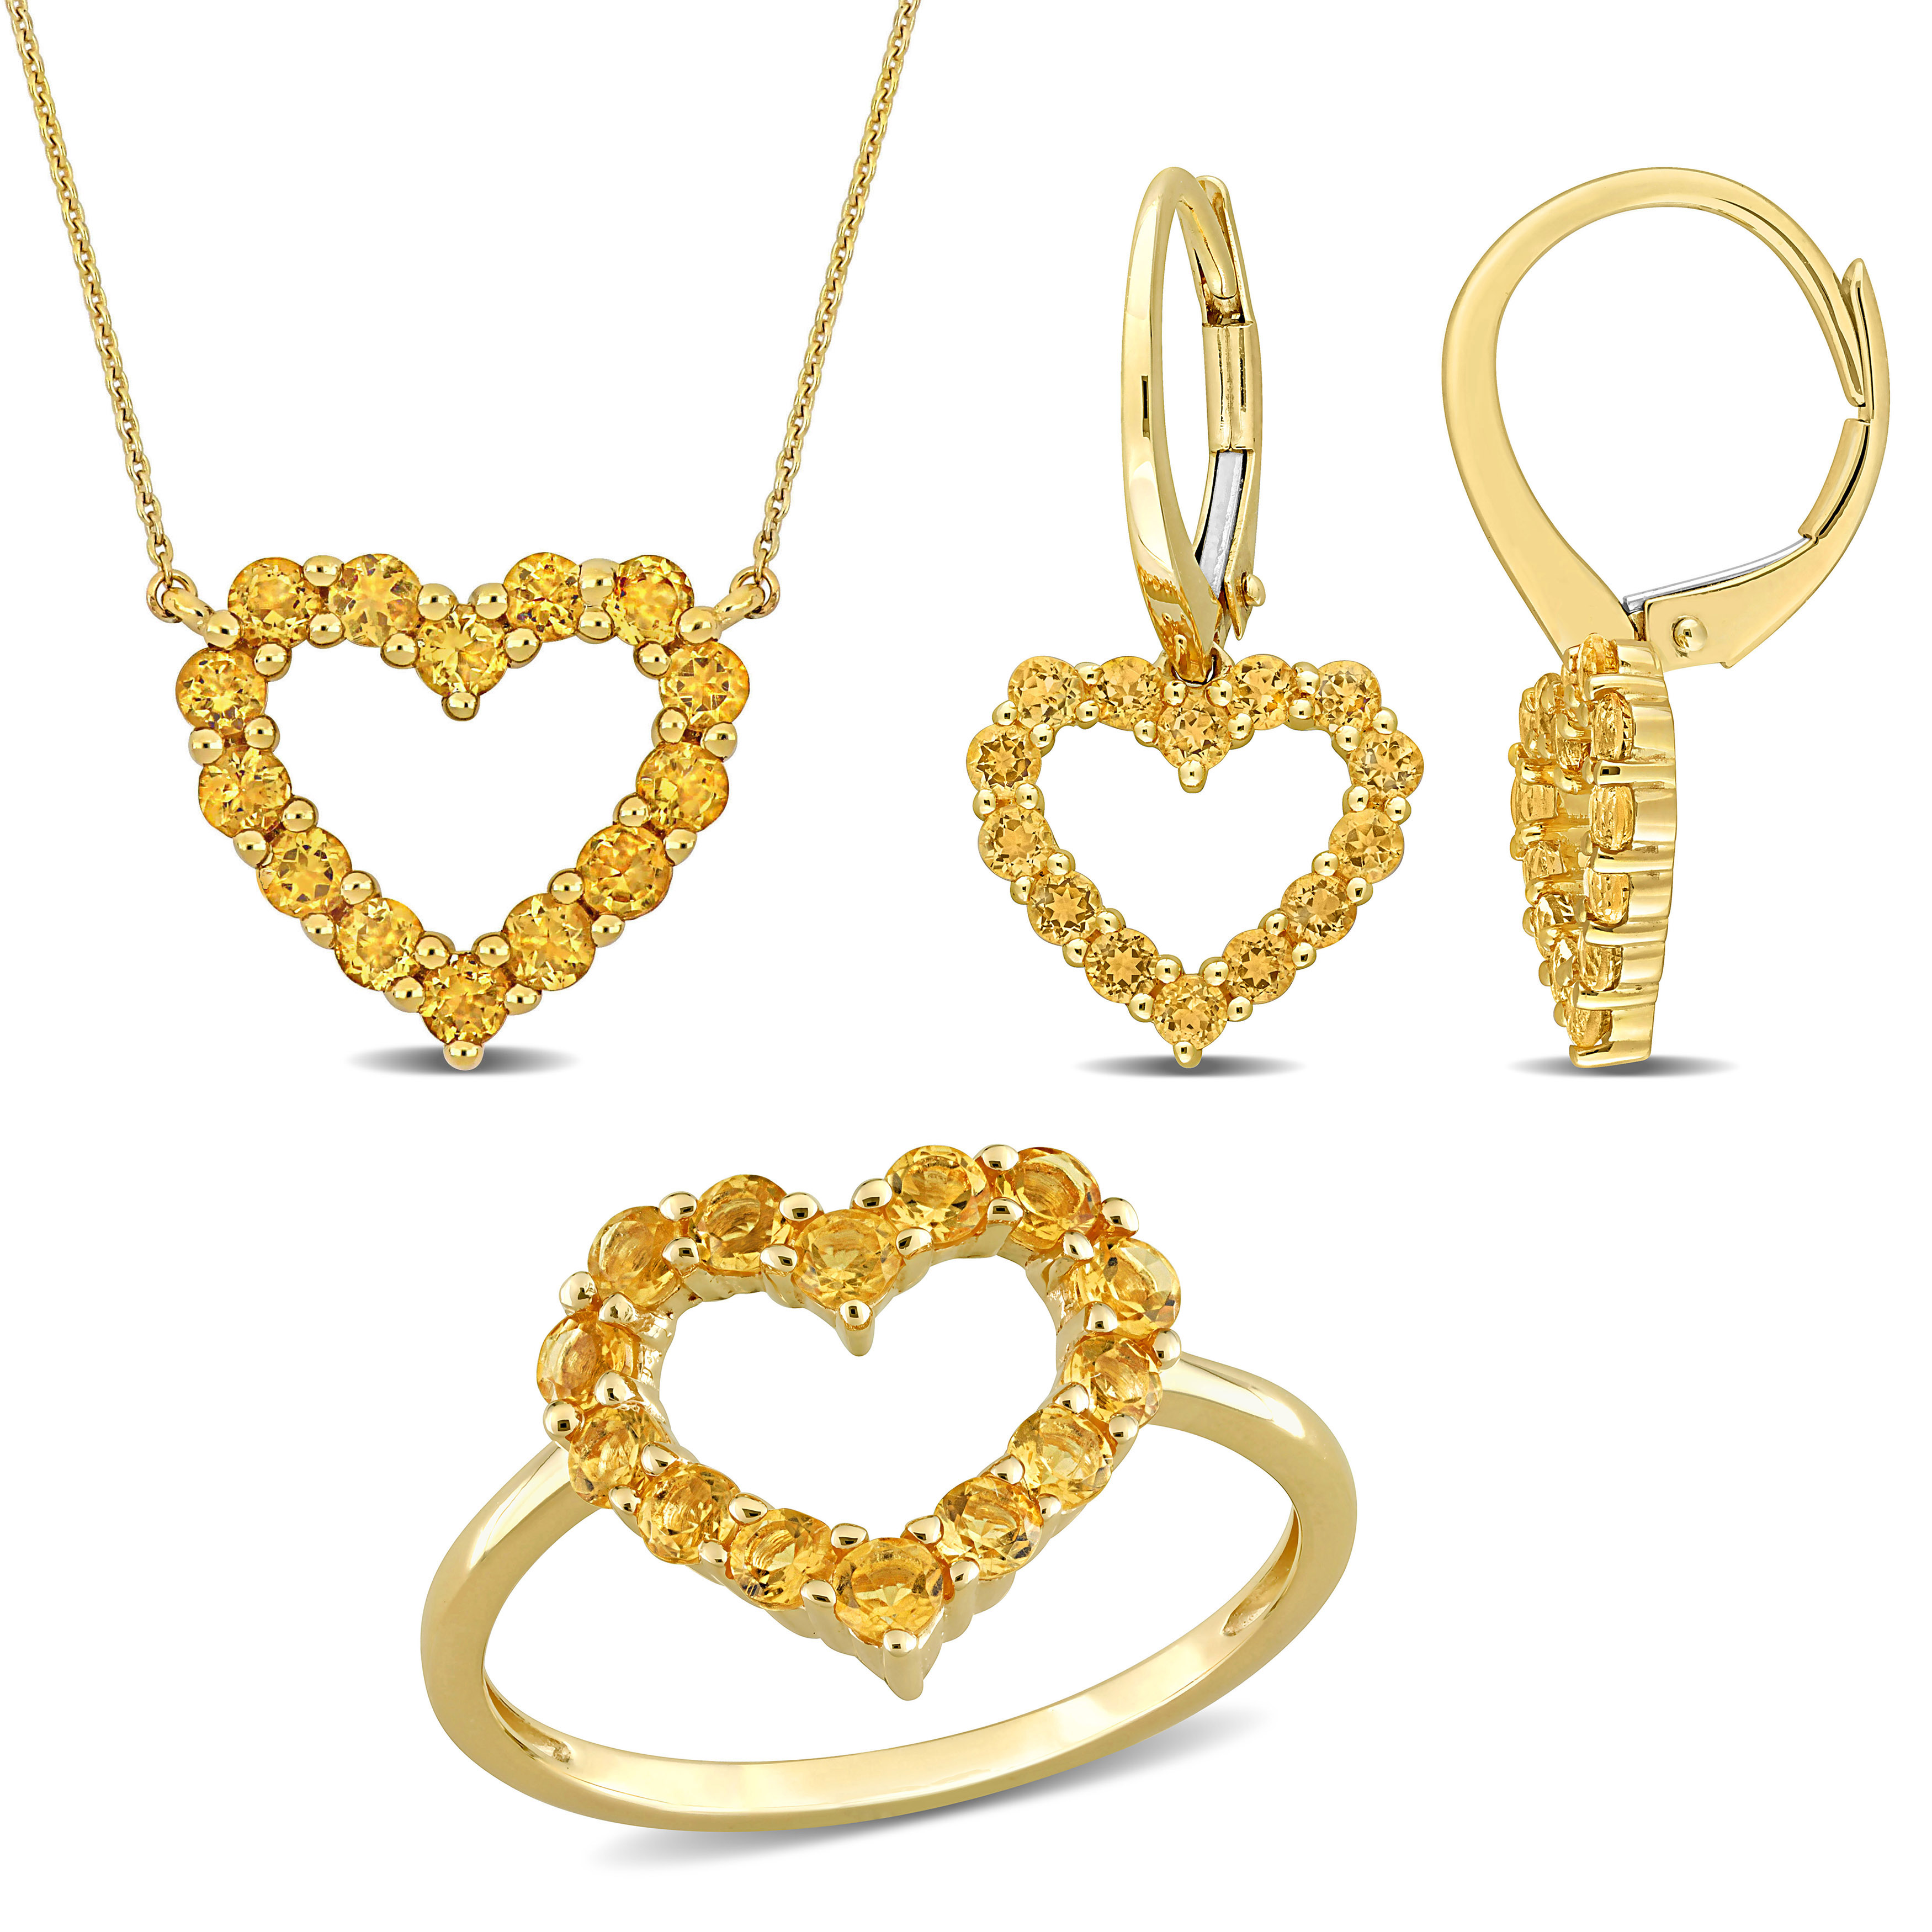 2 1/2 CT TGW Citrine 3-Piece Jewelry Set - Heart Pendant with Chain, Earrings and Ring in 10k Yellow Gold